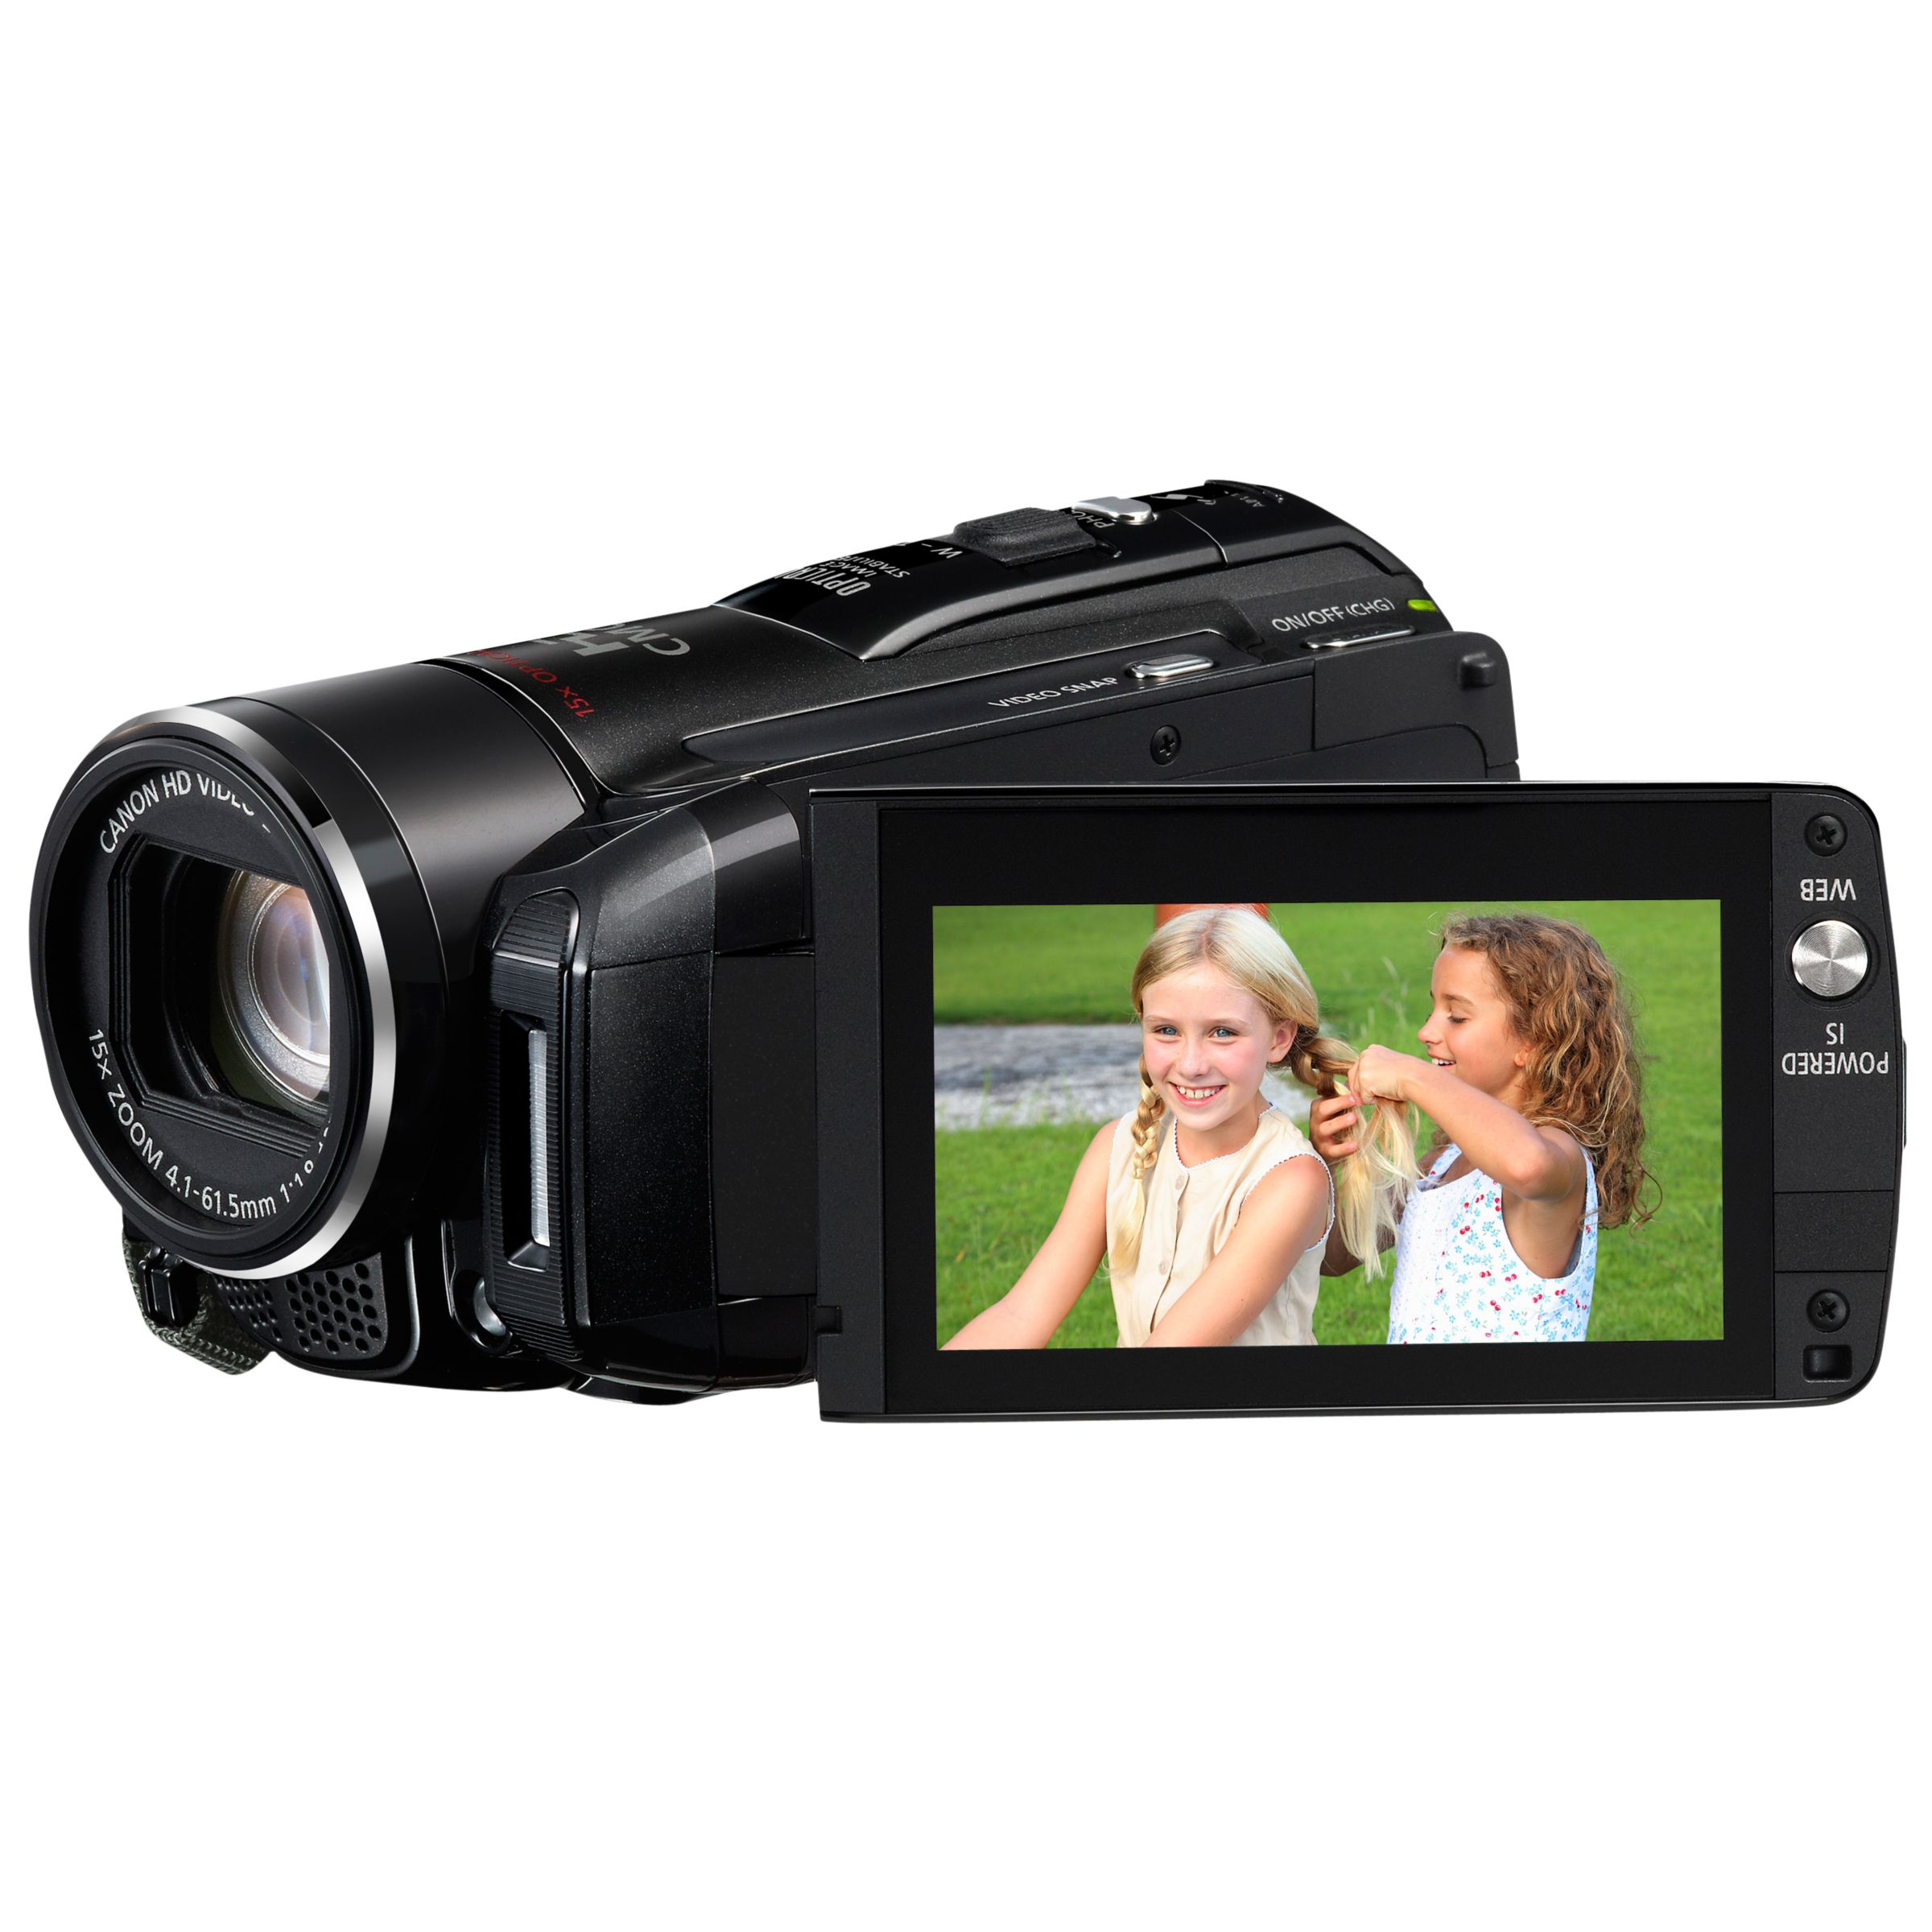 Canon HF M36 8GB Flash Drive SD Camcorder, Black at JohnLewis